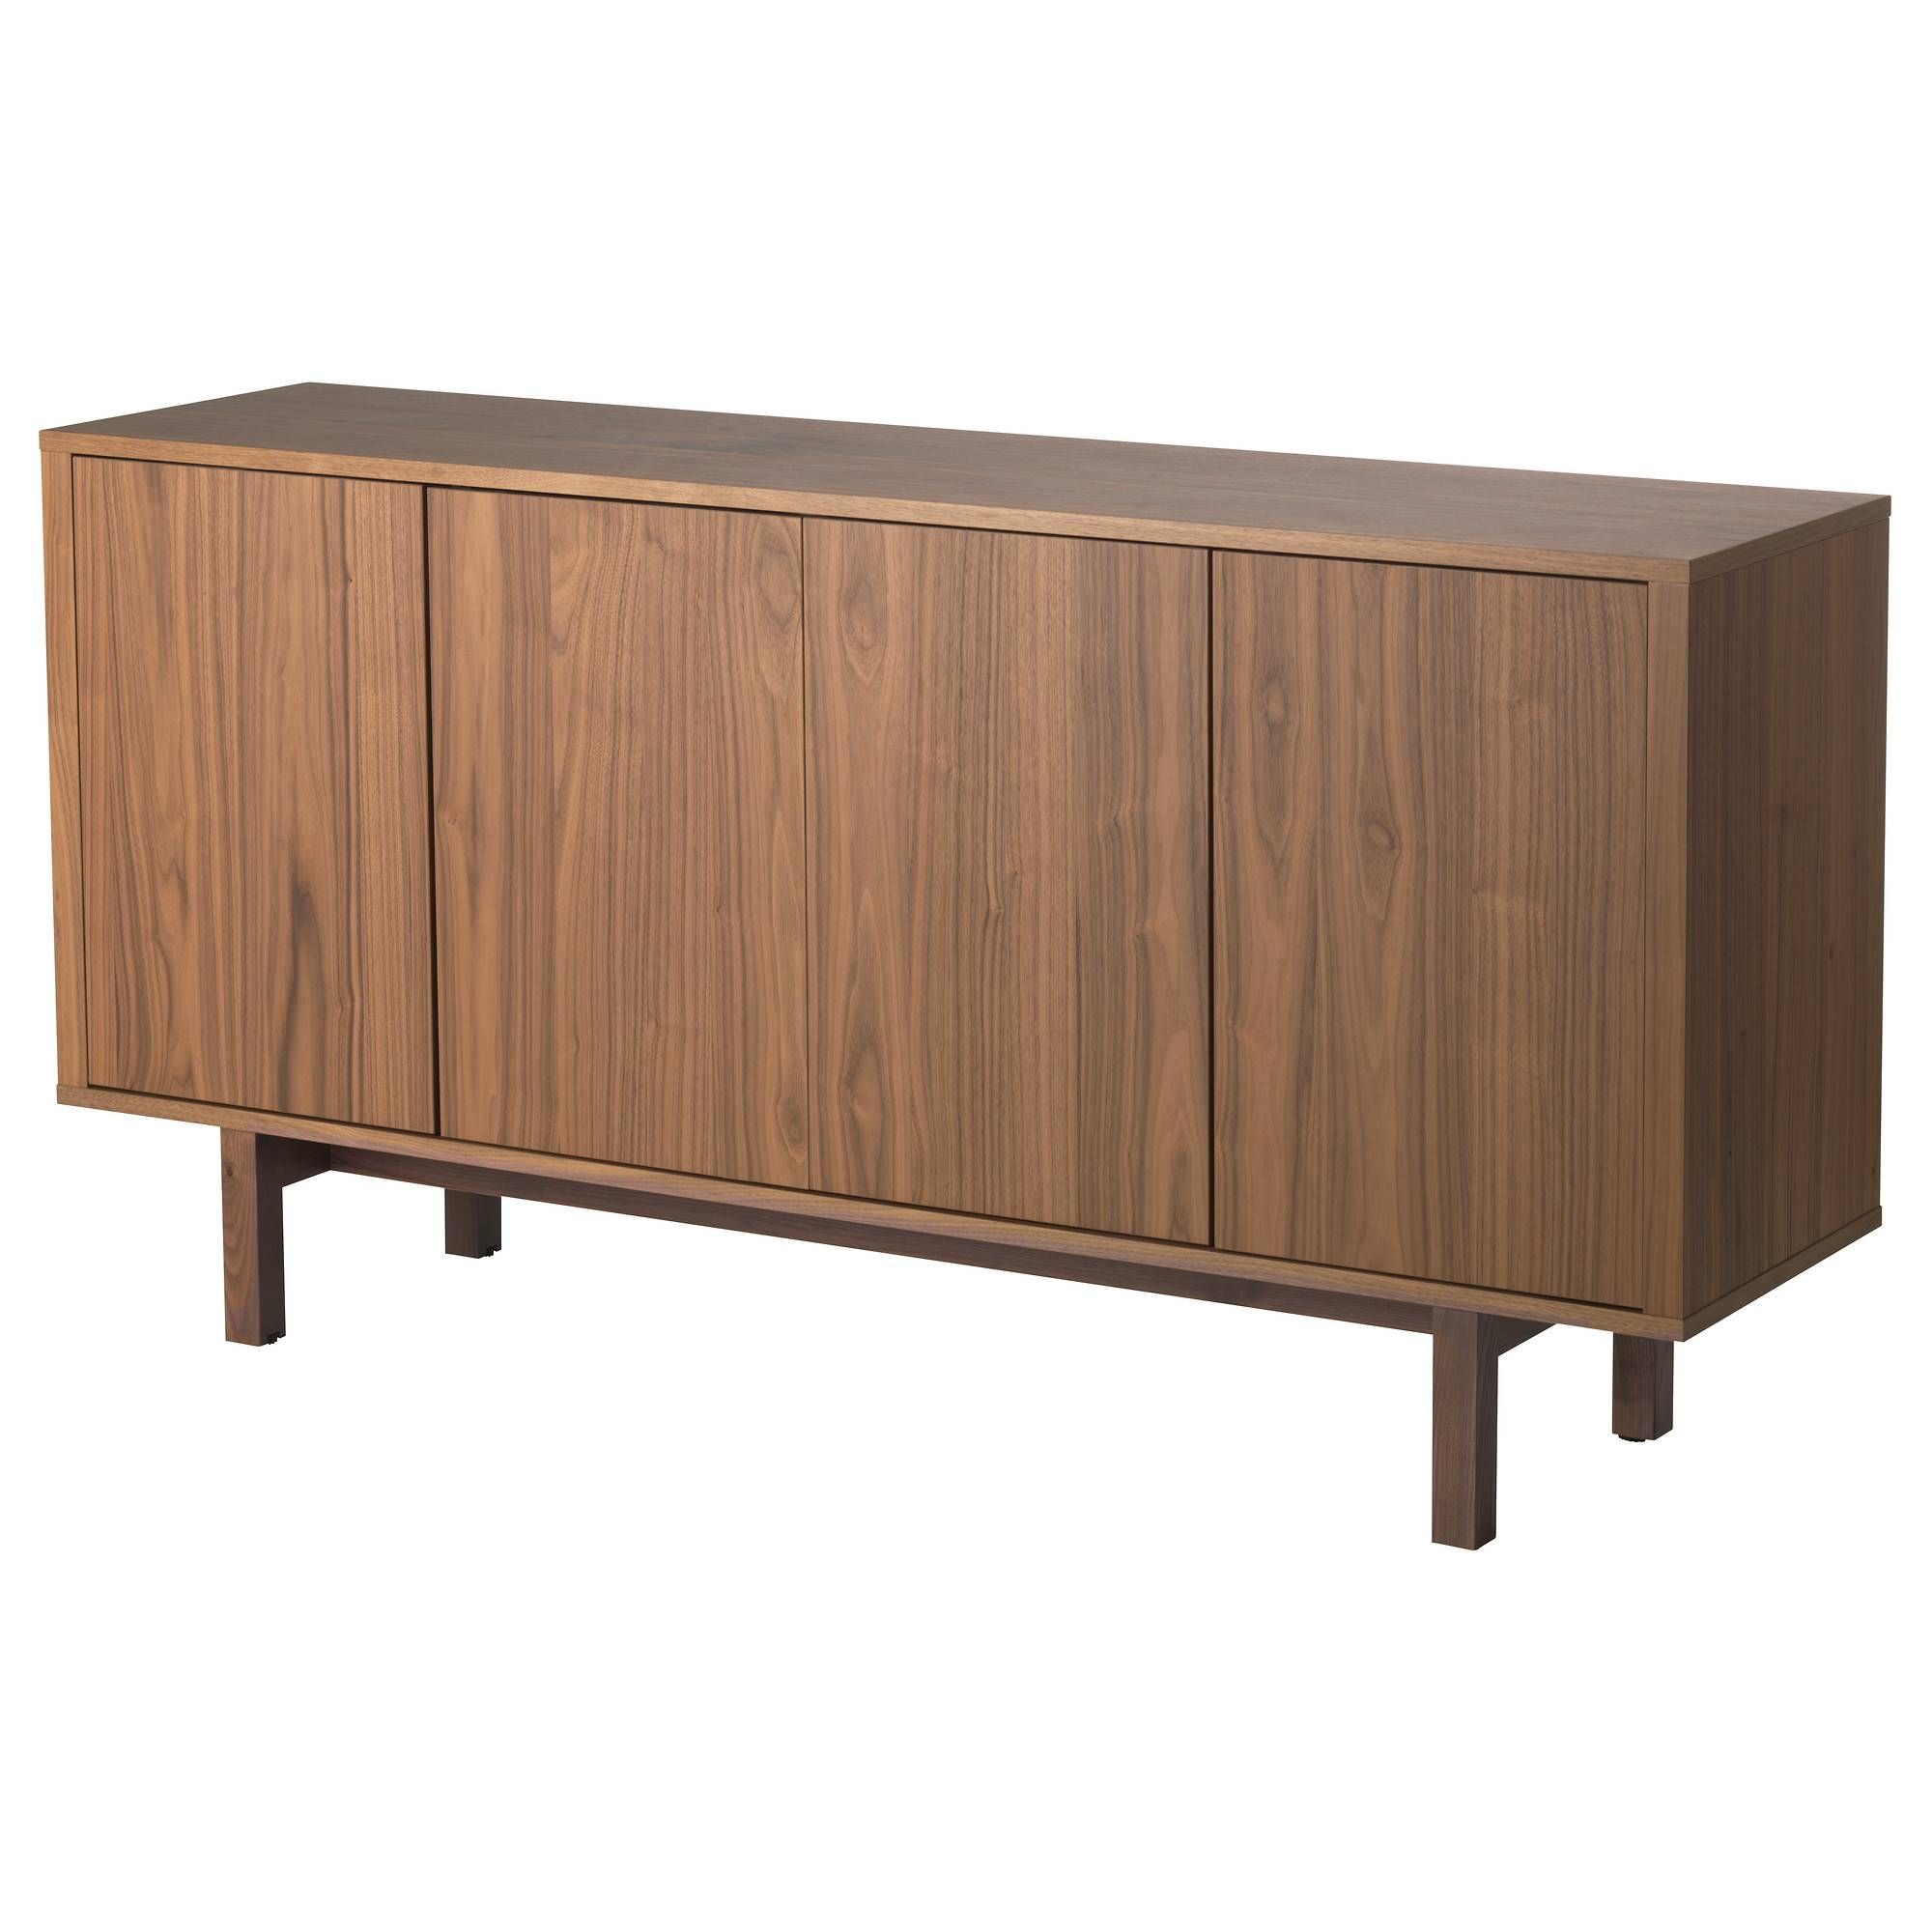 Buffet Tables & Sideboards – Ikea Inside Most Current Sideboard Buffet Tables (View 13 of 15)